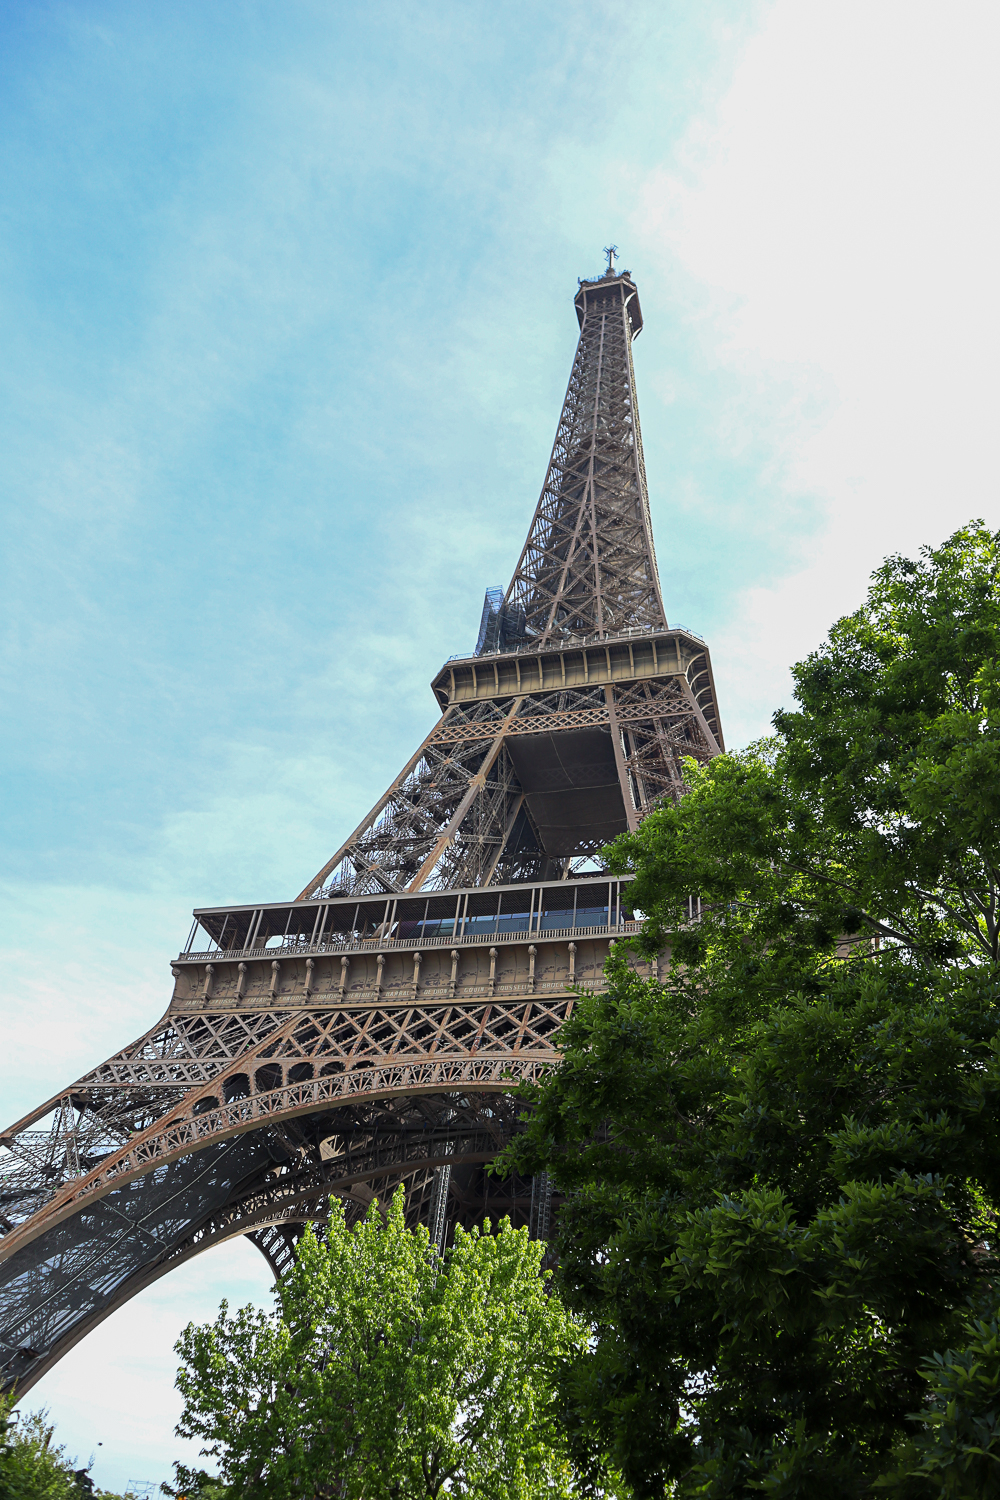 Pacific Globetrotters, budget family travel blog, shares 5 day itinerary in Paris with kids. Eiffel Tower